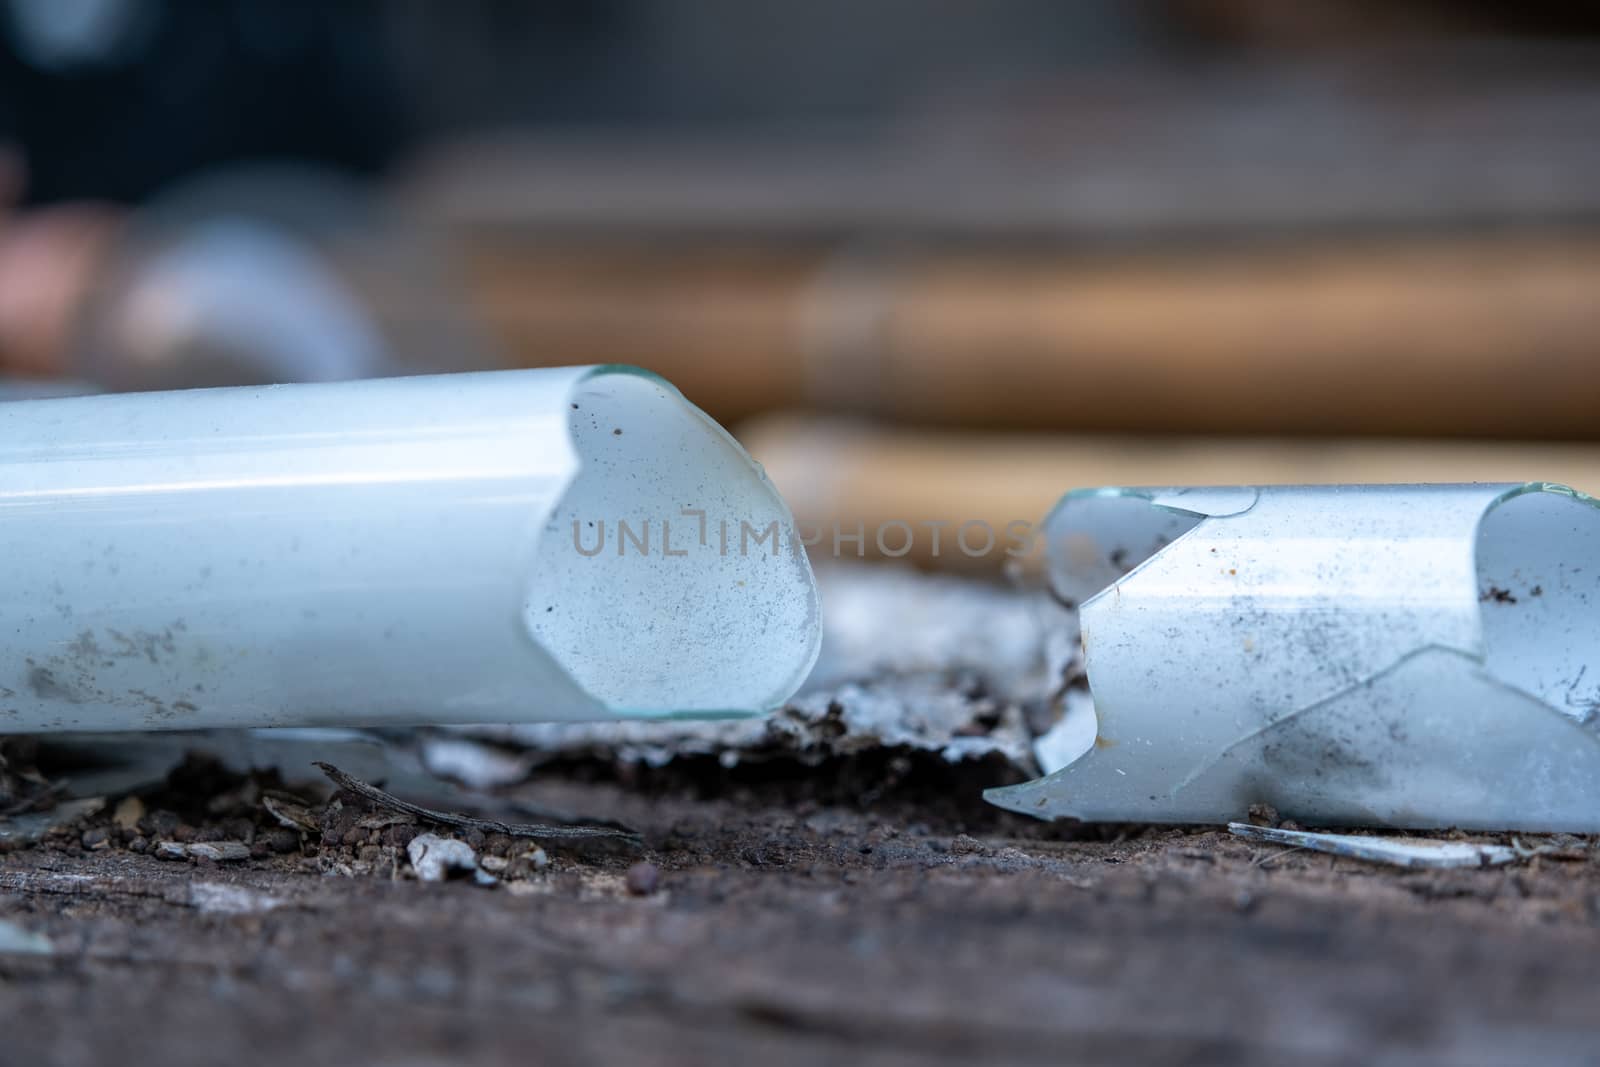 The select focus Pile of broken fluorescent light bulb is danger for health with blur background by peerapixs